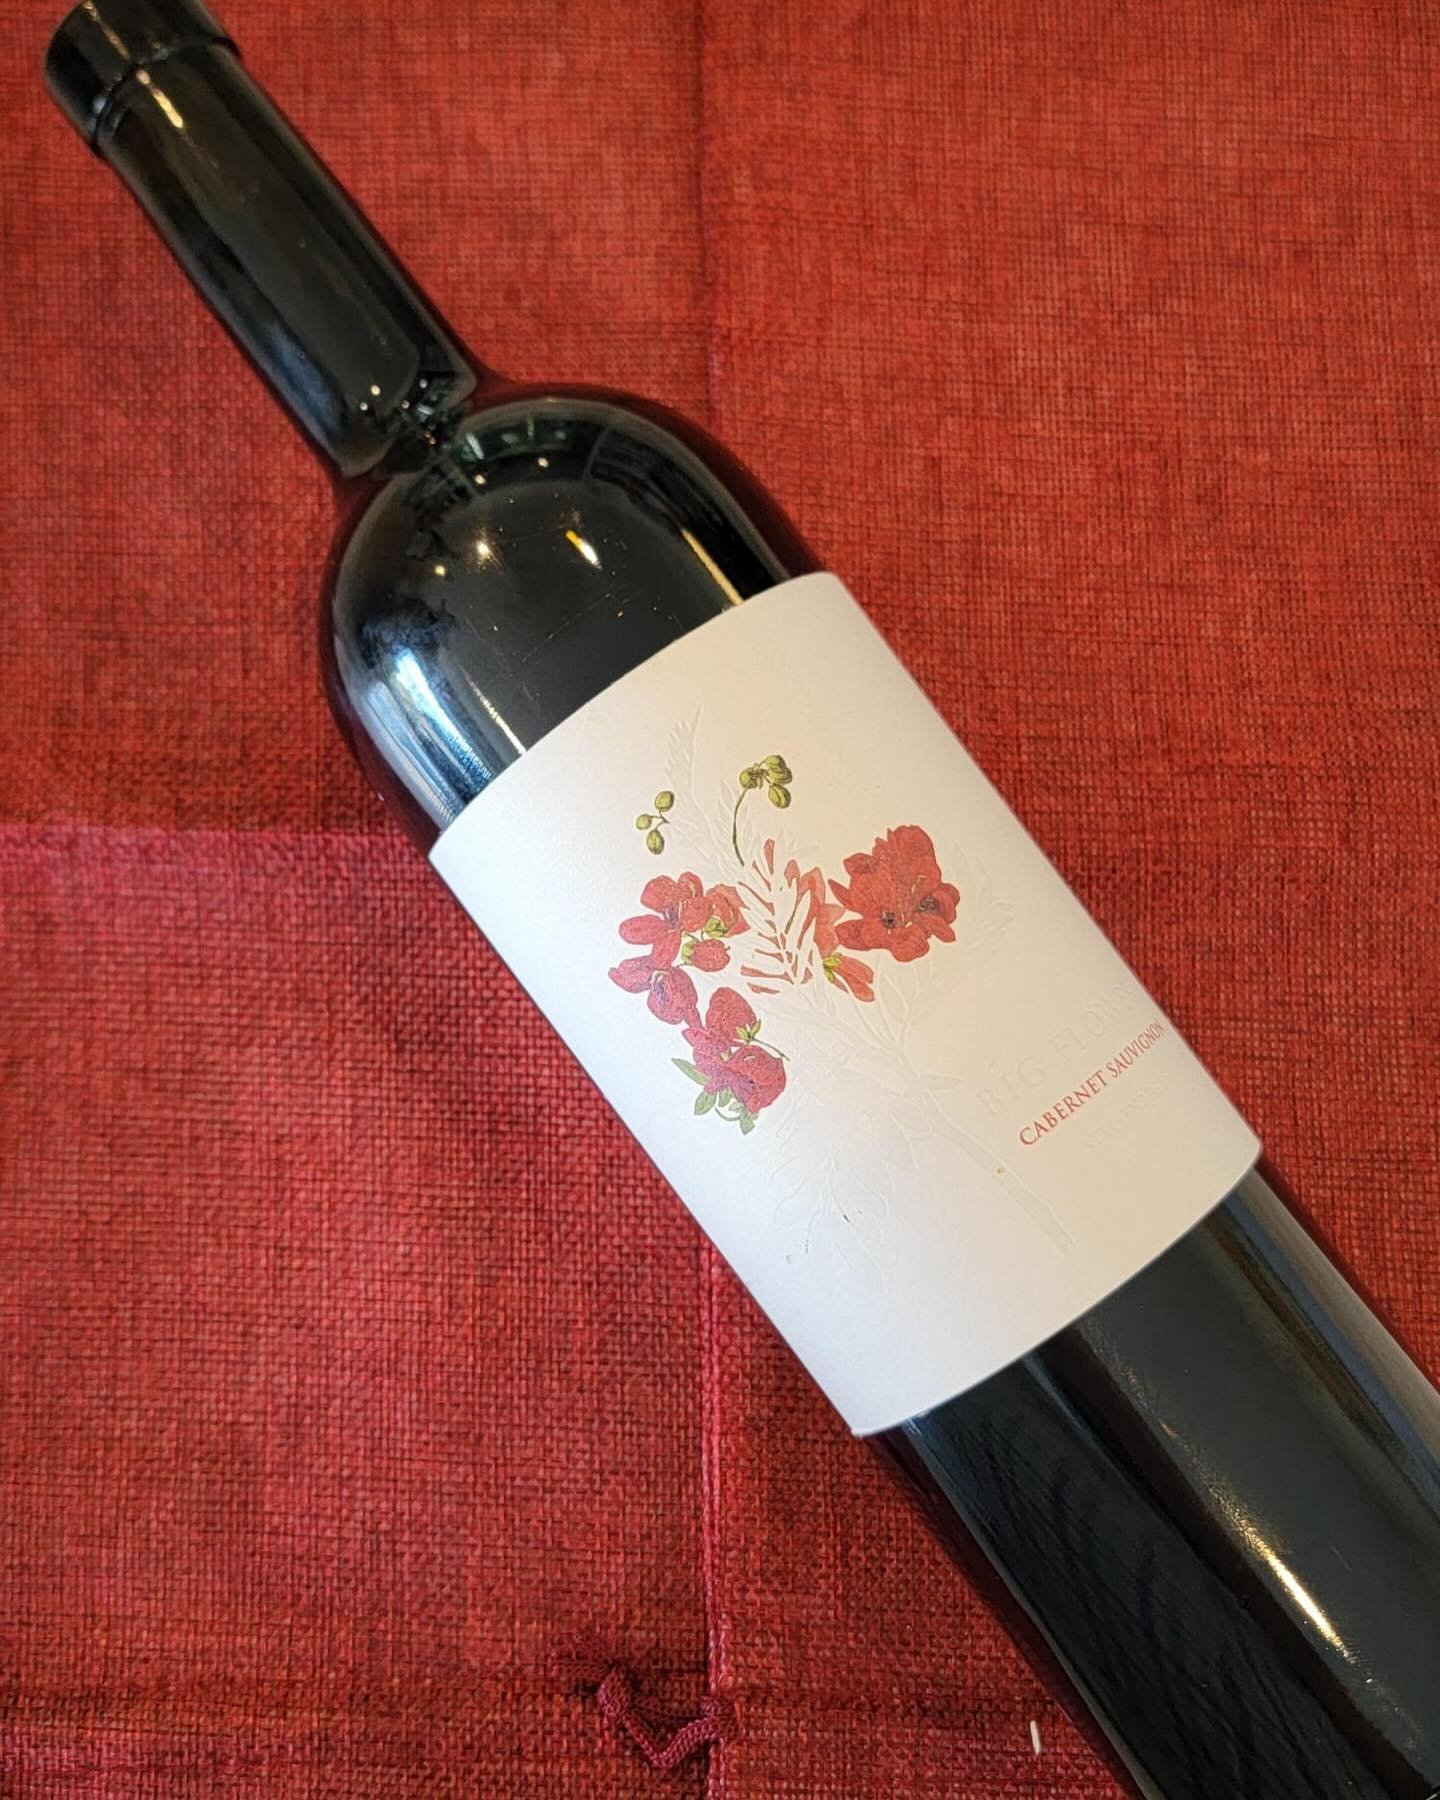 Happy Wine Wednesday!

I think we can all say we love a good cab, but sometimes as it gets warmer it&rsquo;s harder to find one that fits the weather. In steps Big Flower Cab from Botanical Wines in South Africa. This wine comes from a higher elevati